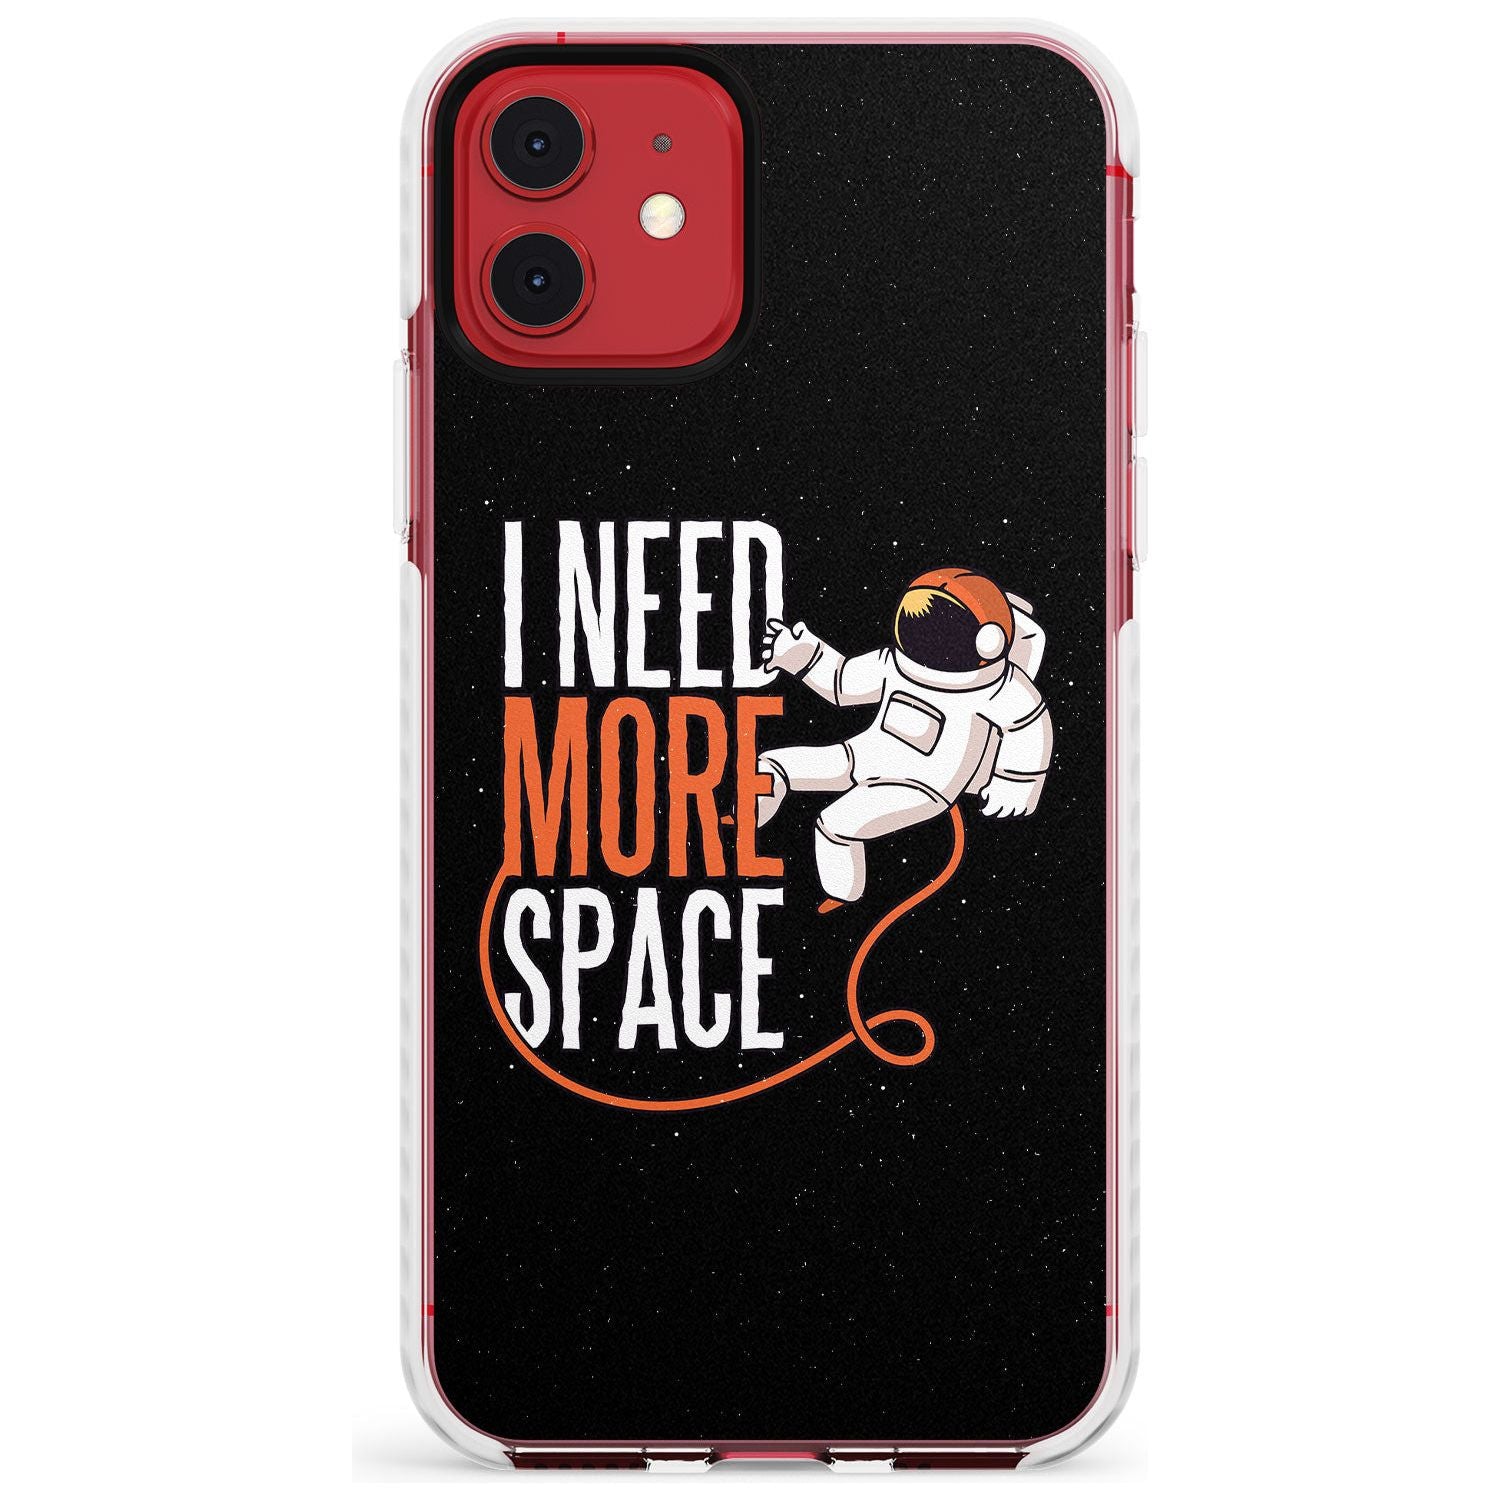 I Need More Space Slim TPU Phone Case for iPhone 11